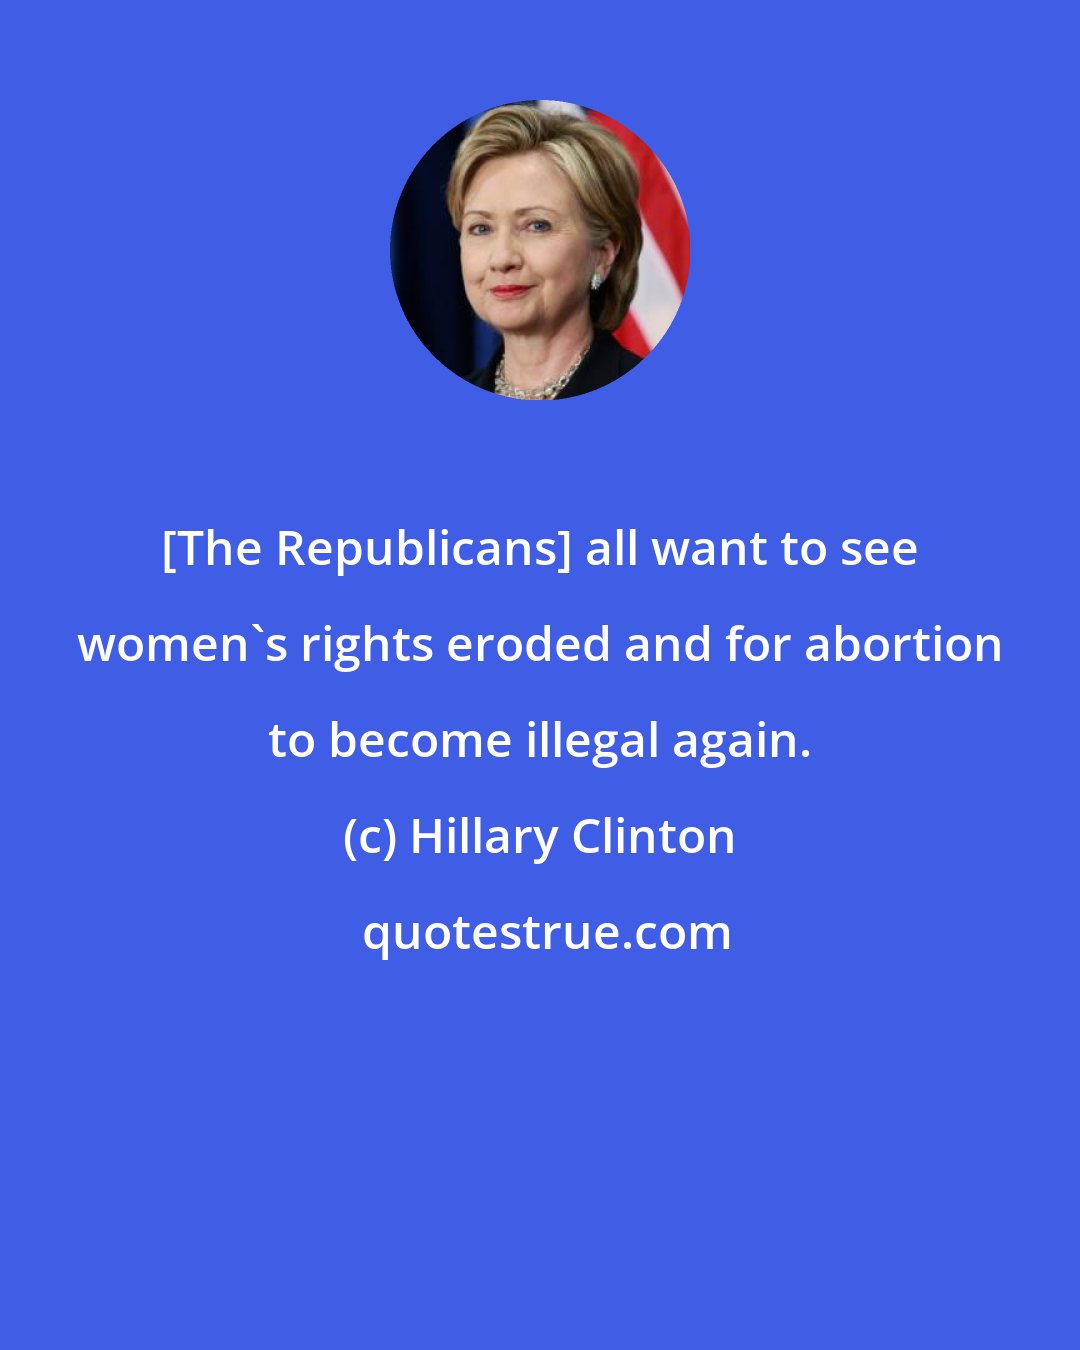 Hillary Clinton: [The Republicans] all want to see women's rights eroded and for abortion to become illegal again.